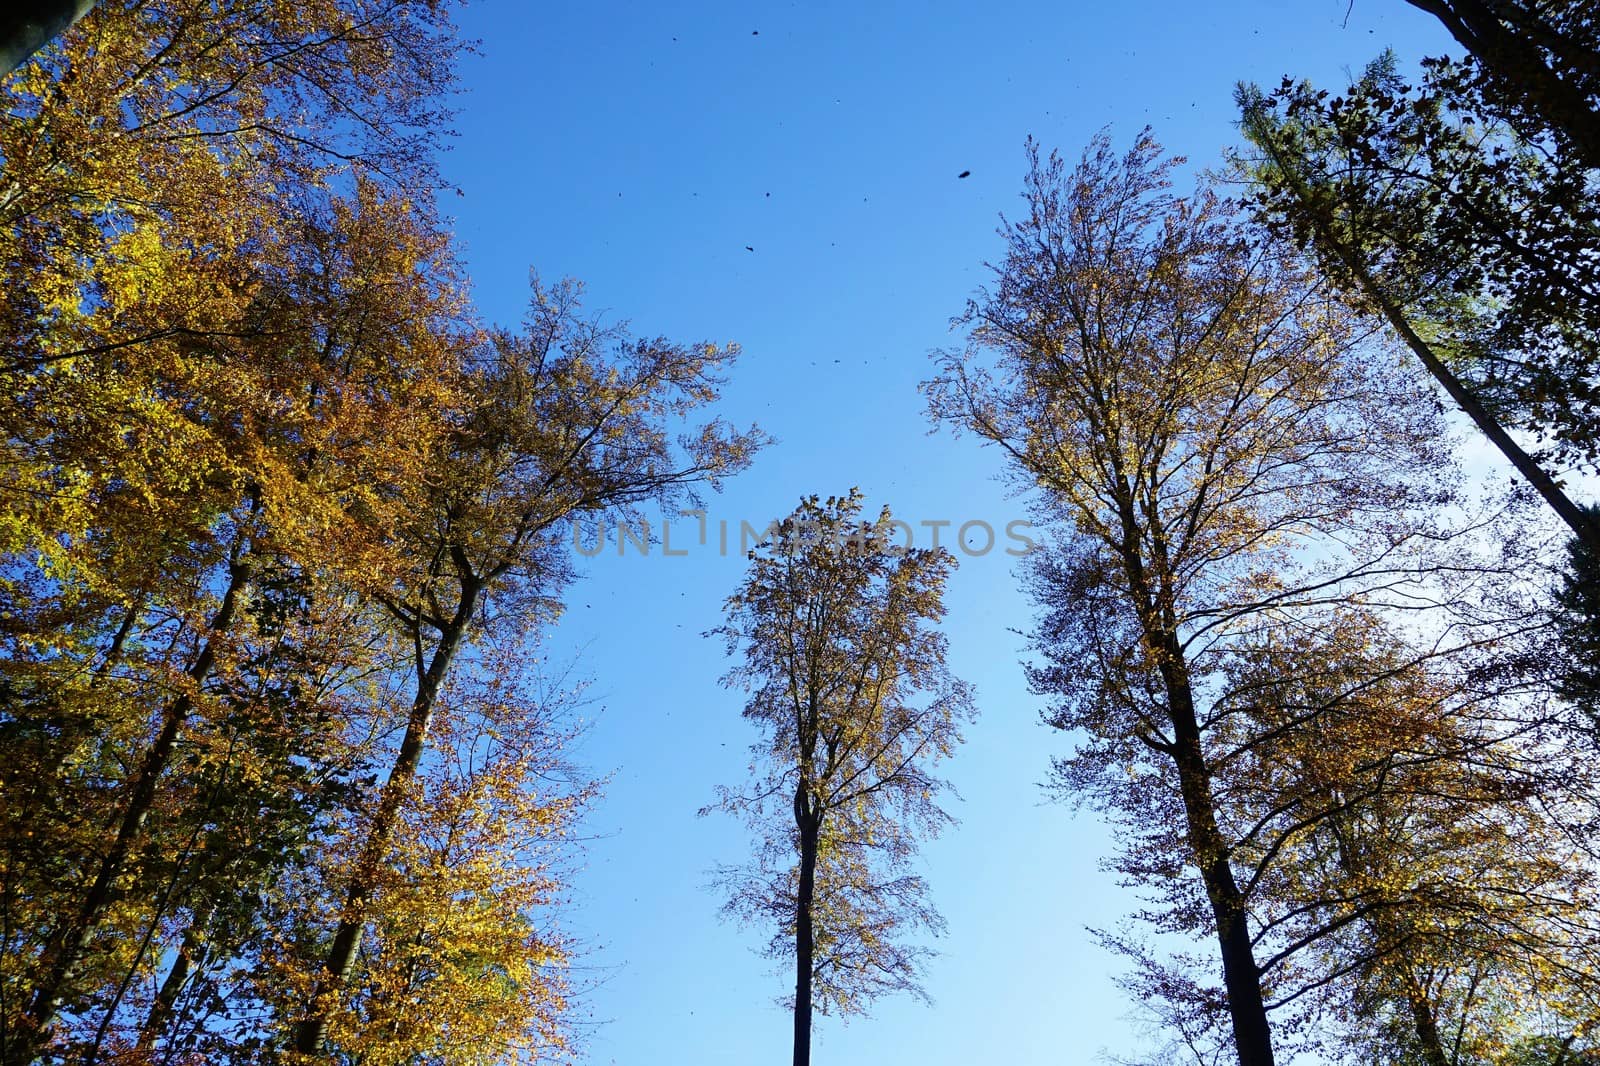 Clearing in forest with leafes in the sky